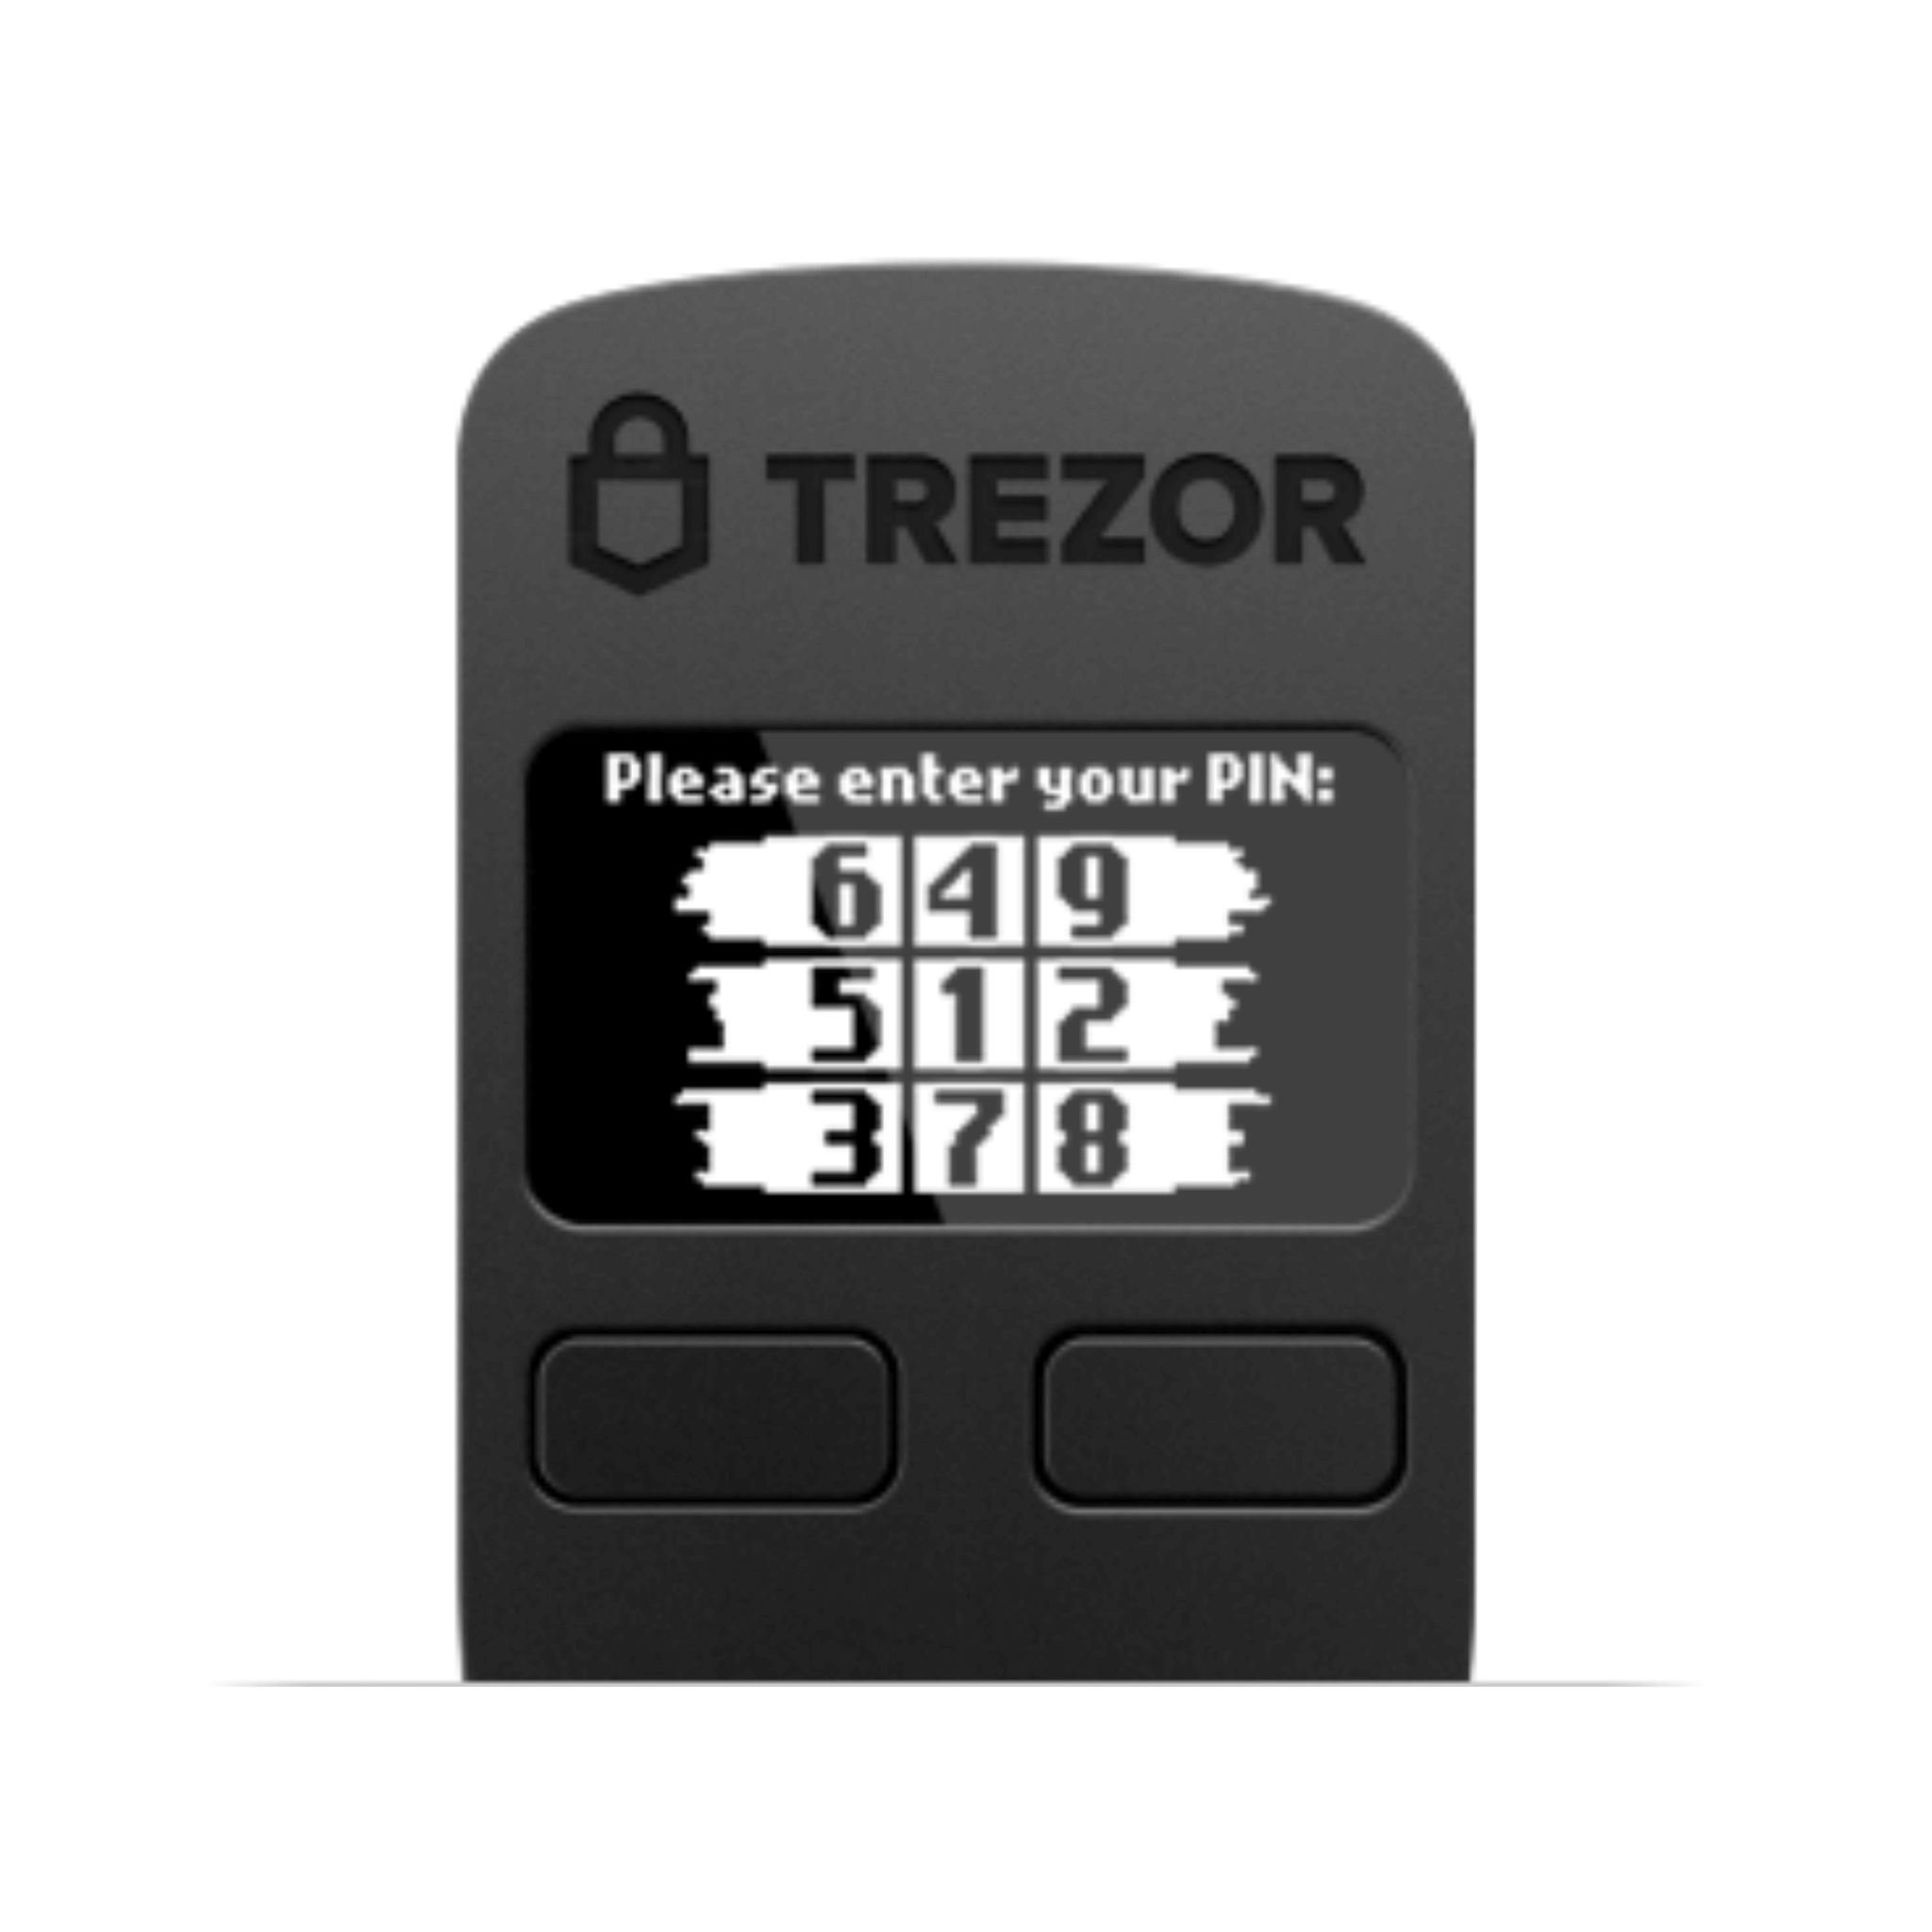 Trezor Model One Cryptocurrency Hardware Wallet Pin Feature